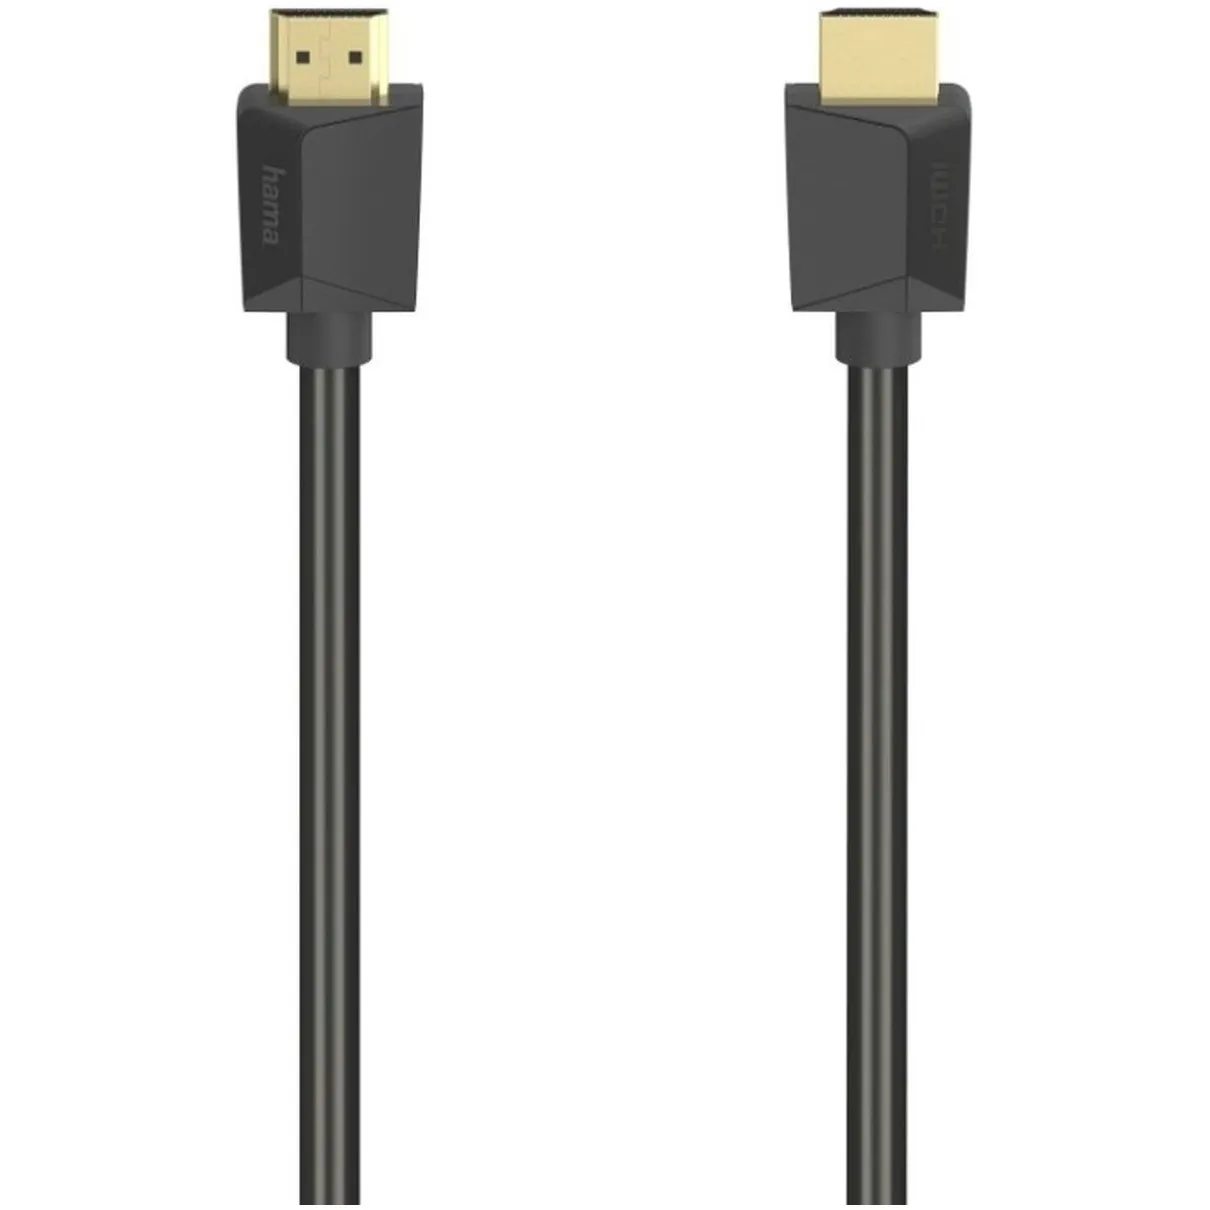 Hama ULTRA HIGH-SPEED HDMI-KABEL, CONNECTOR-CONNECTOR, 8K, 1,0 M